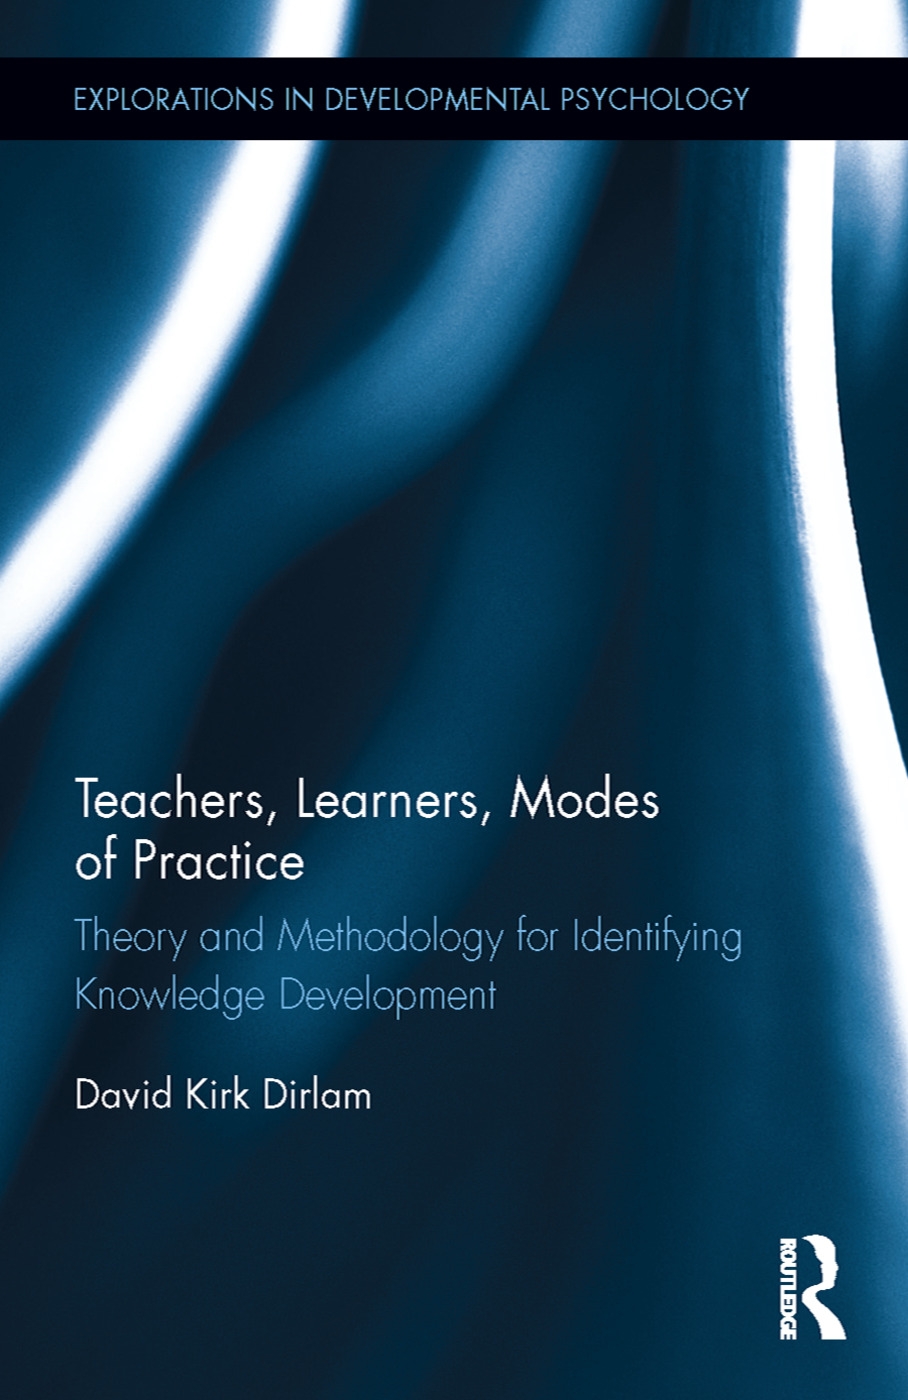 Teachers, Learners, Modes of Practice: Theory and Methodology for Identifying Knowledge Development